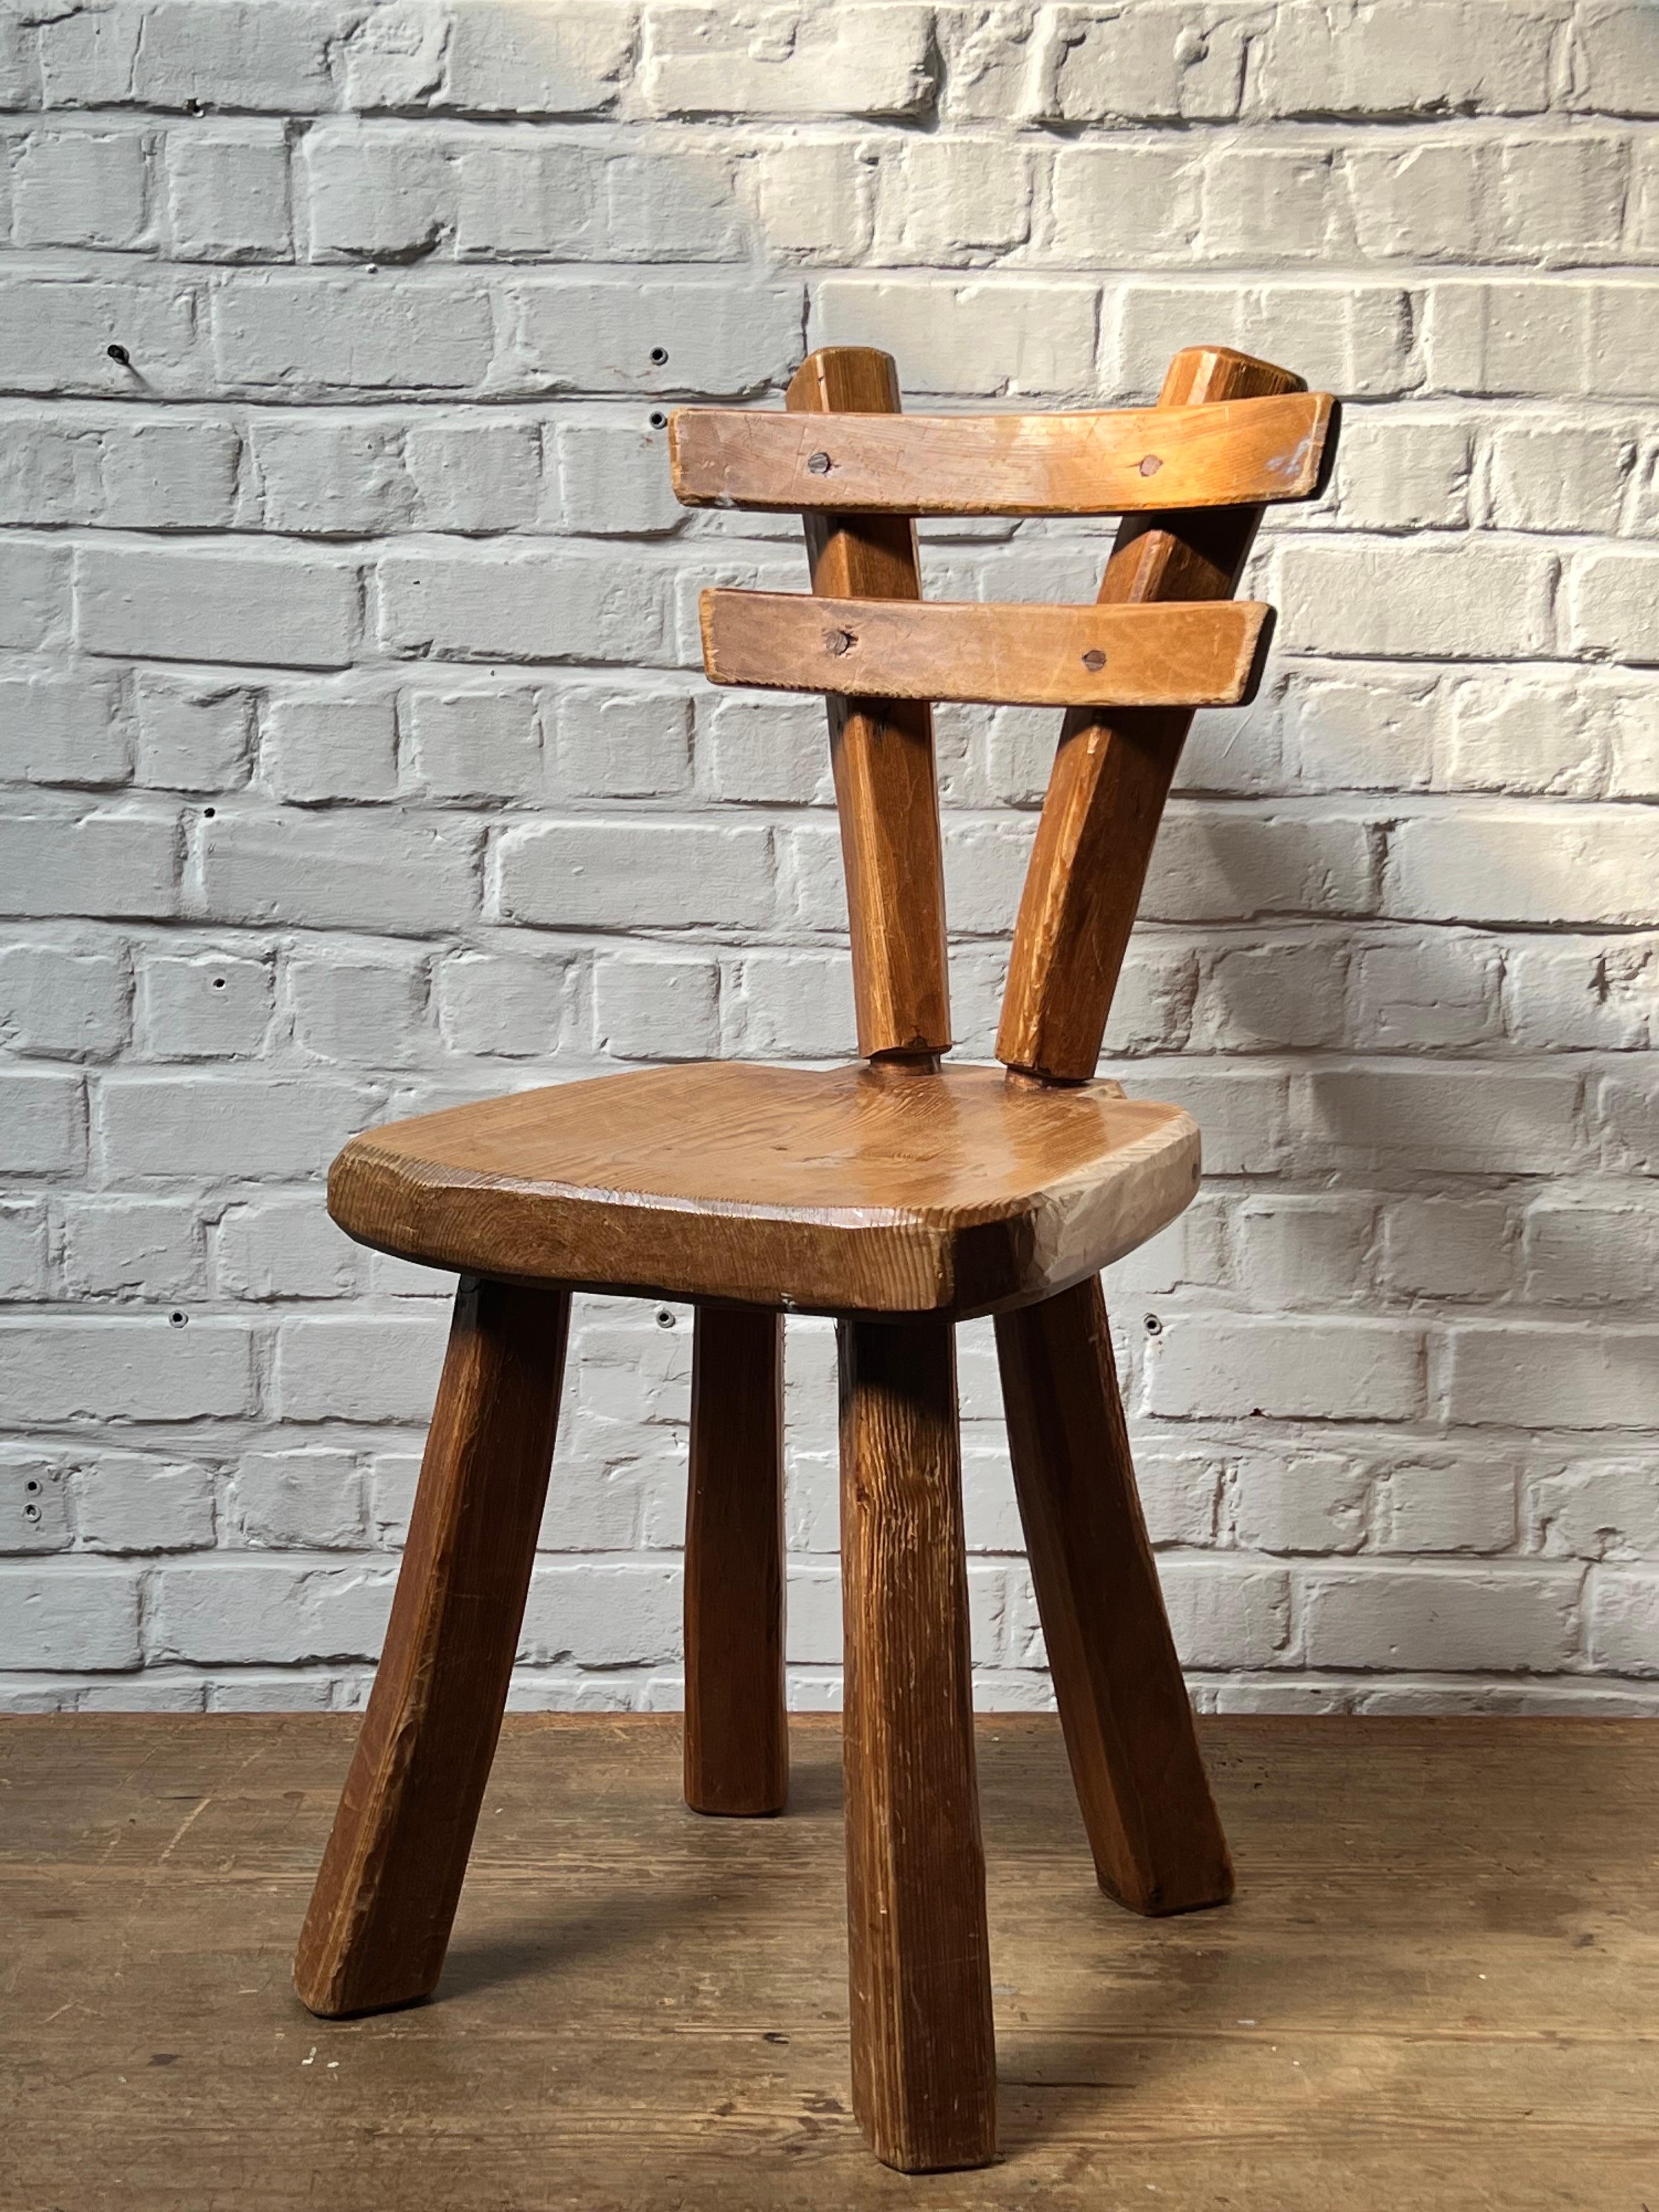 Very unique handmade with massive pine . The joinery is two cylinder which provide a nice effect. The overall is patinated and shows various shades of brown/brownish colors. Elegant and brutalist describe that chair properly. Very strong chair. We